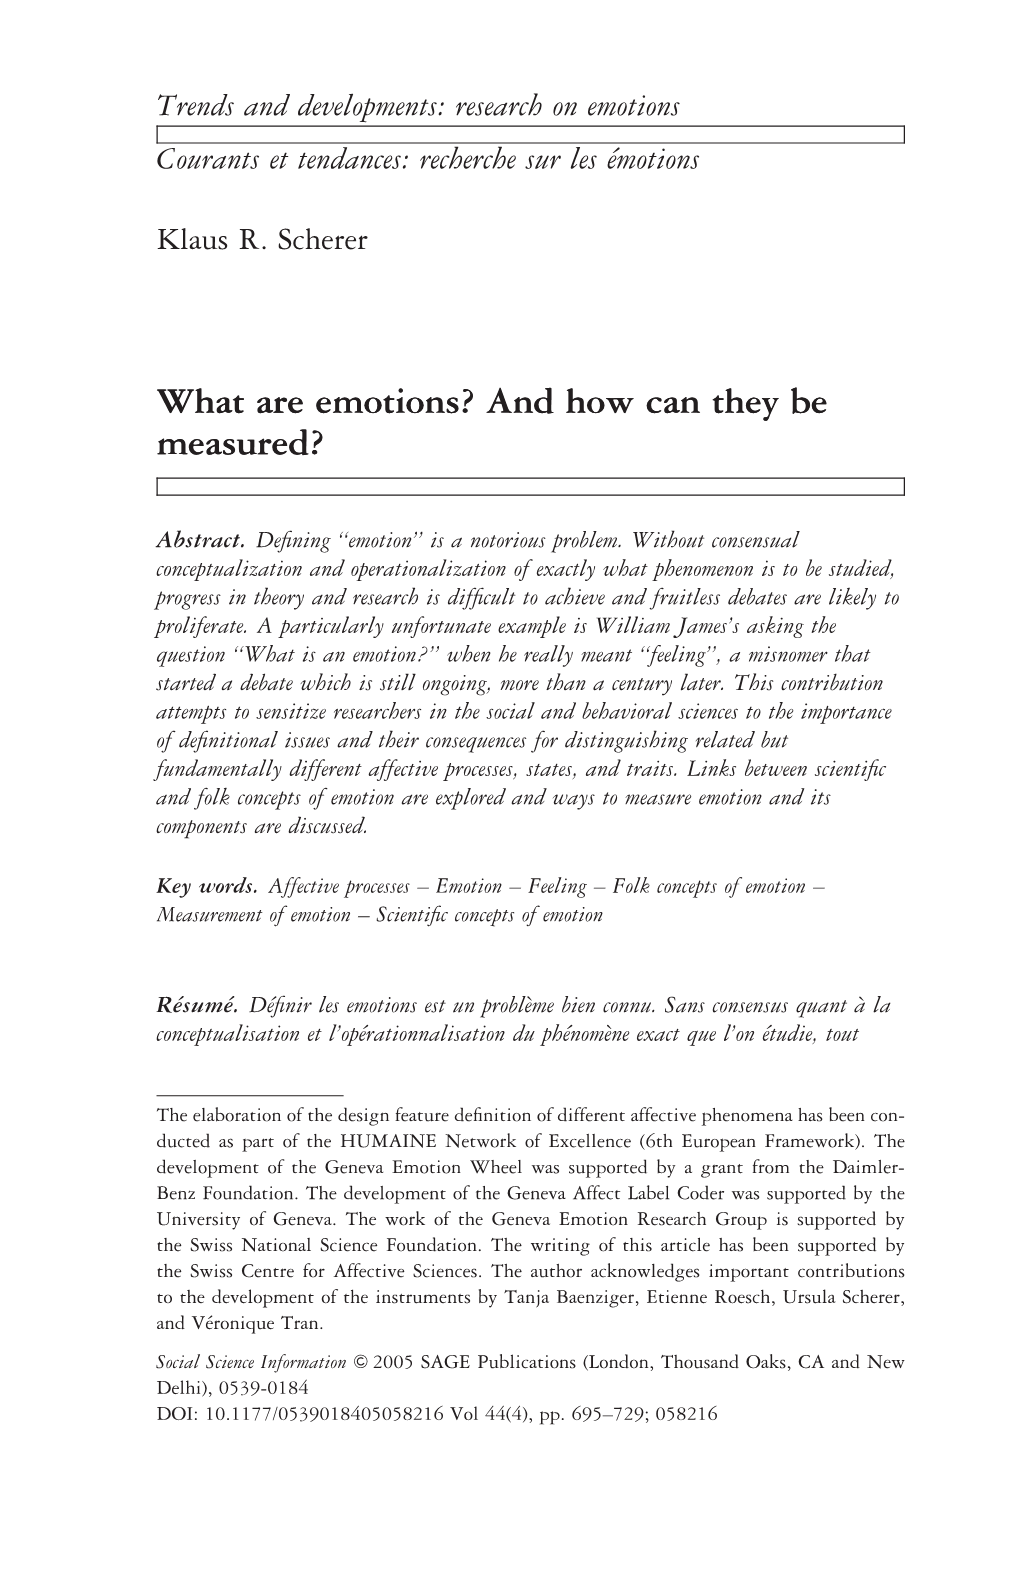 What Are Emotions? and How Can They Be Measured?